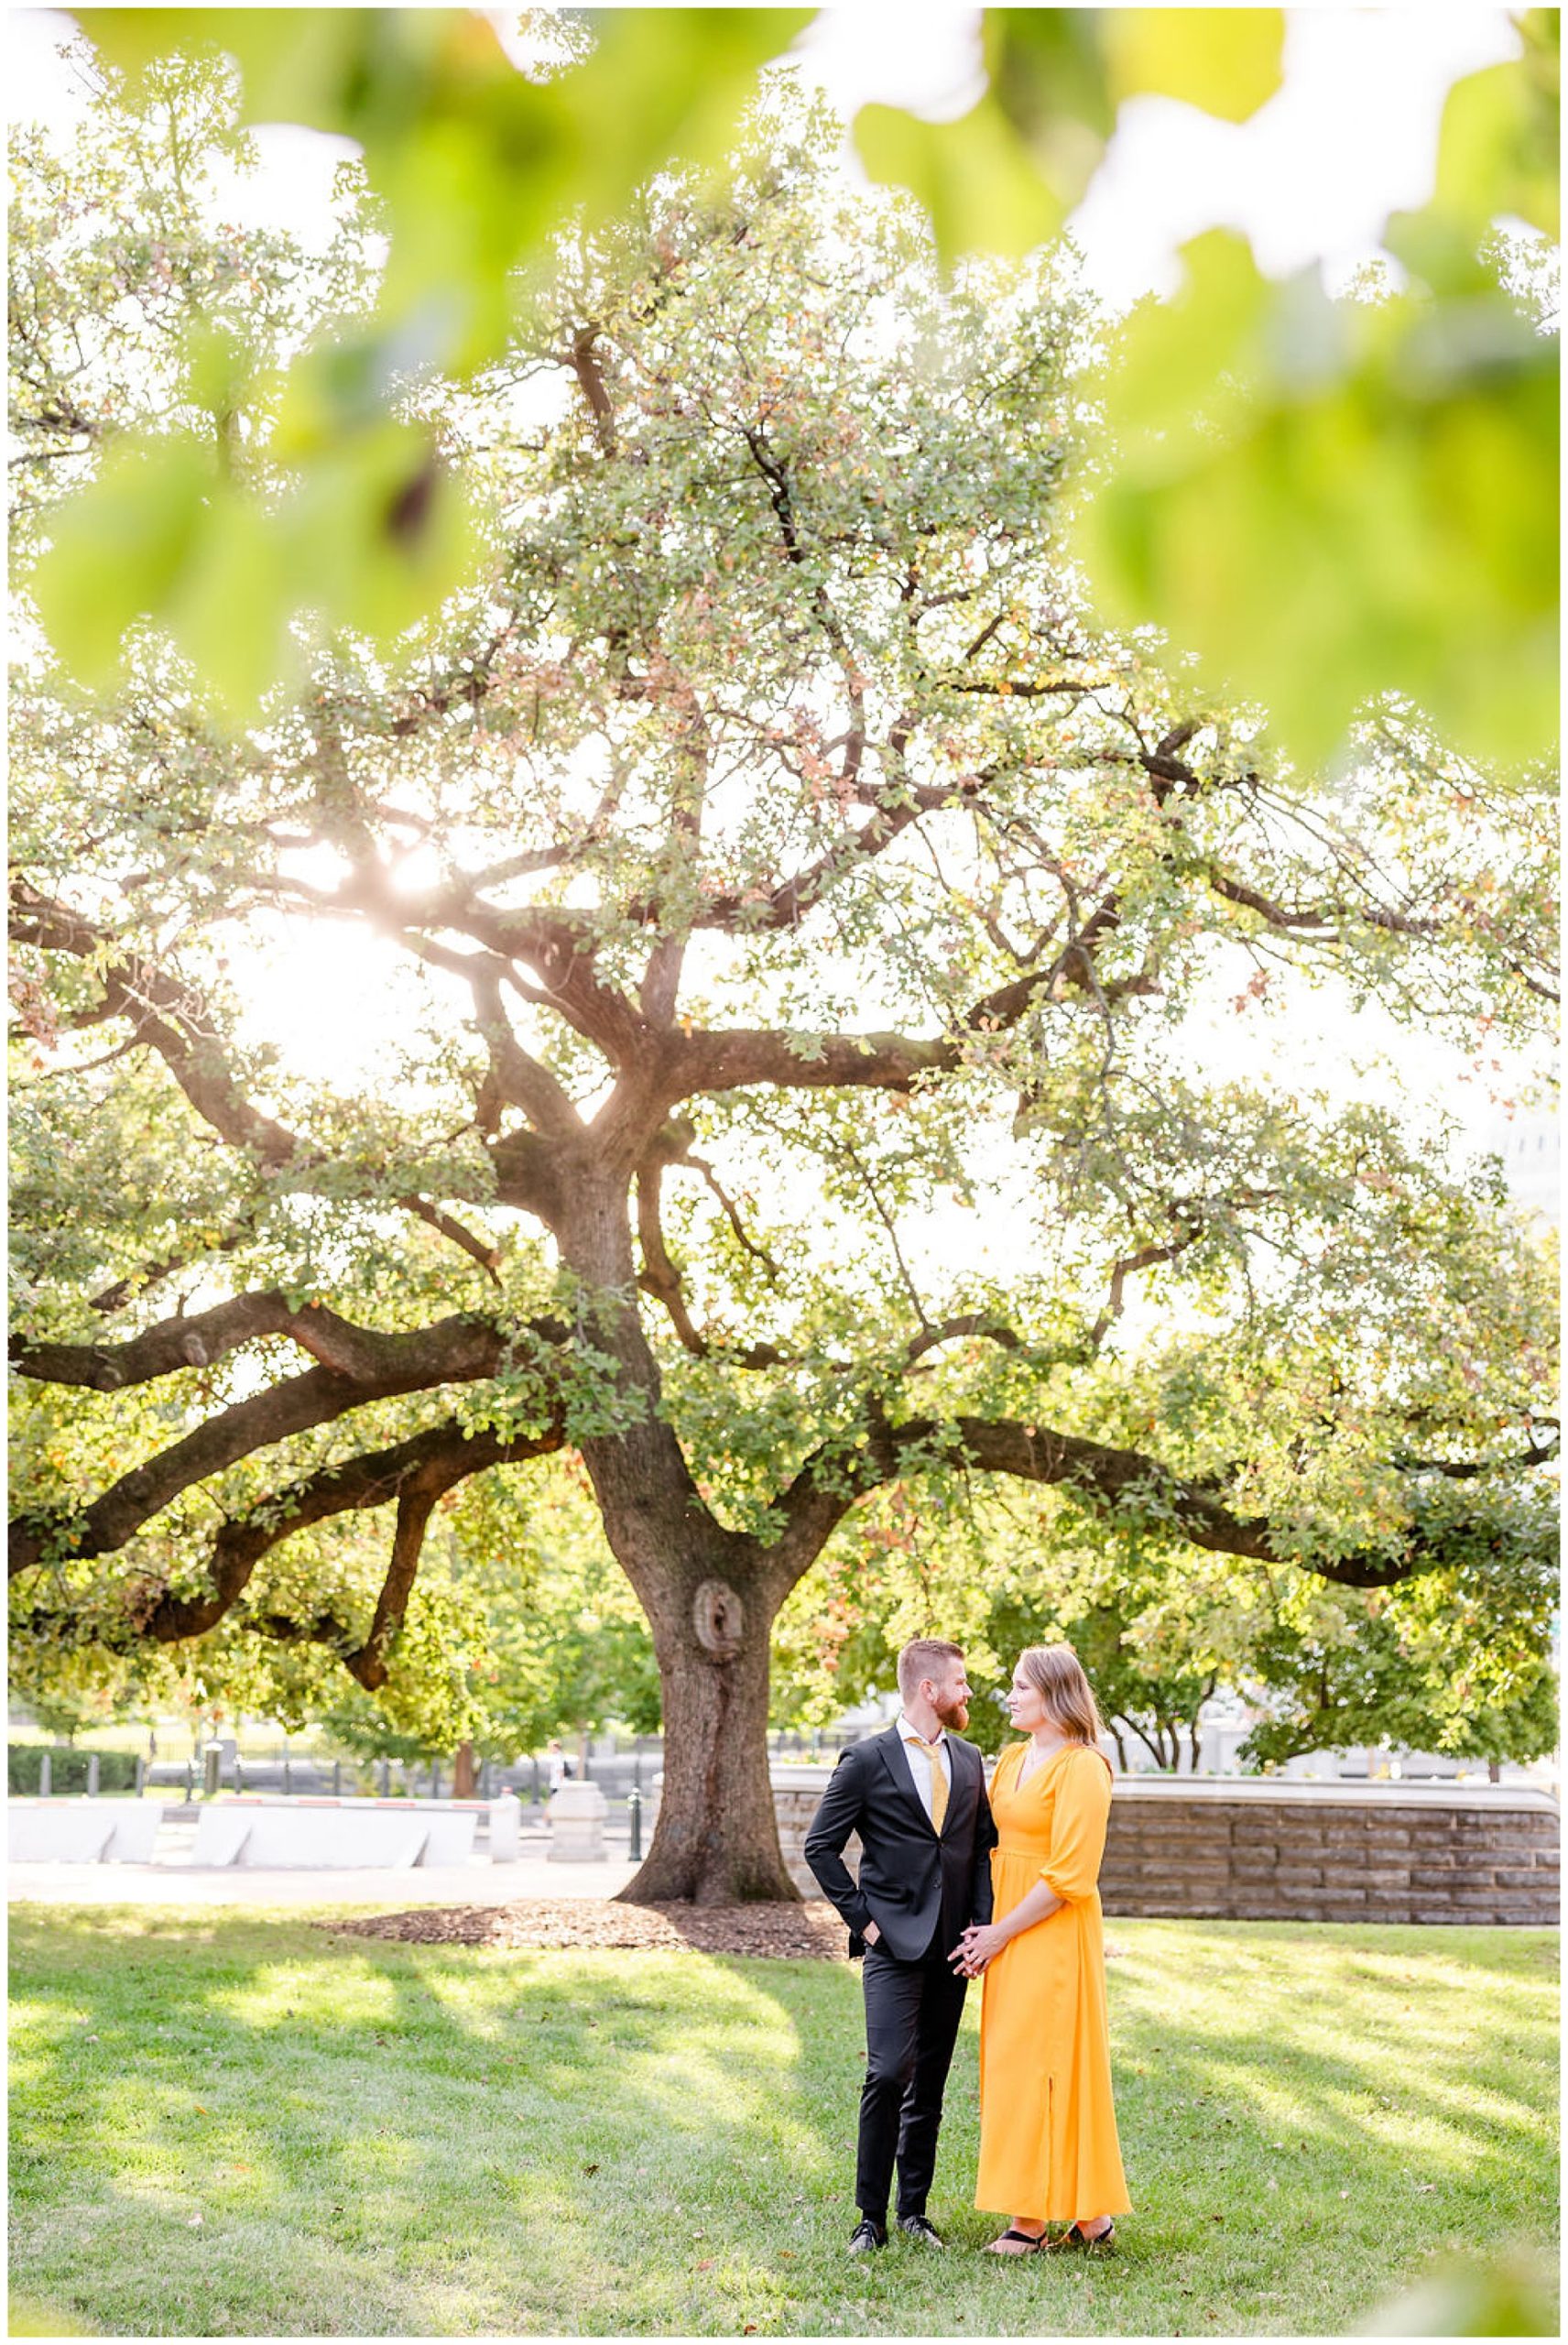 glowing Capitol Hill elopement portraits, Capitol Hill Washington DC, DC elopement portraits, DC elopement photographer, DC wedding photographer, DC portrait photographer, DC photographer, Capitol Hill portraits, autumn portraits, Capitol Hill photographer, Rachel E.H. Photography, couple under tree, couple smiling from behind leaves, camera behind leaves